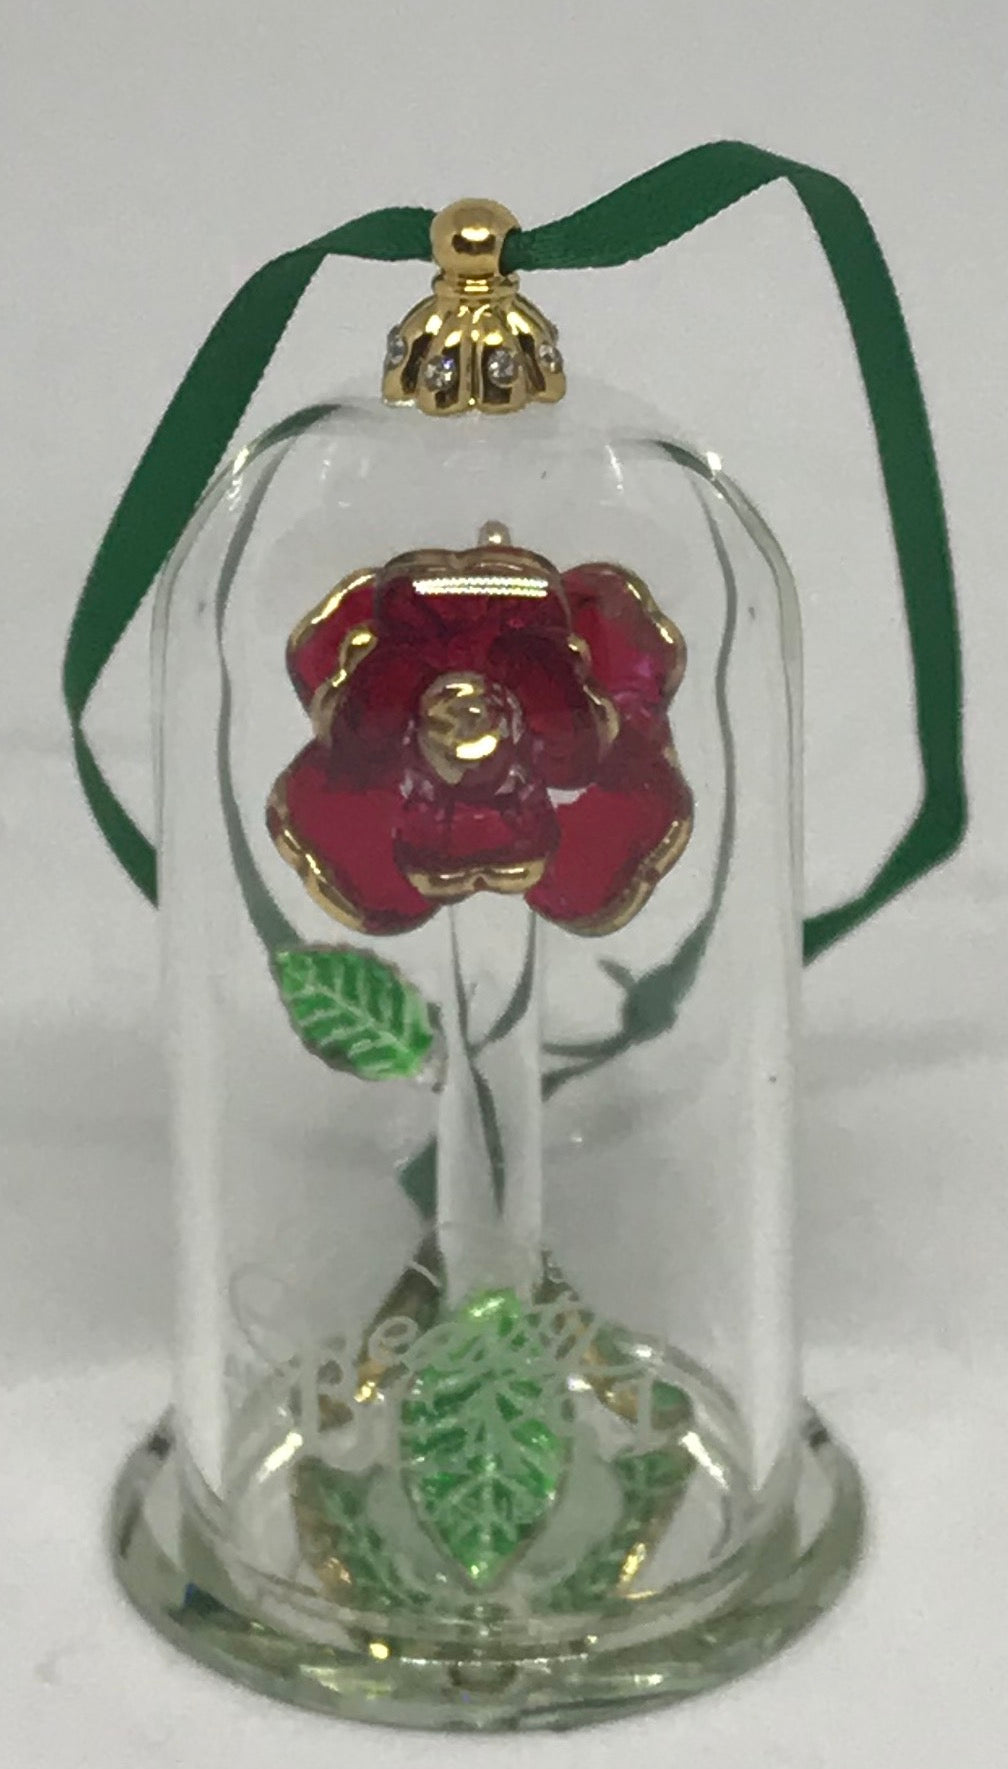 Disney Beauty and the Beast Enchanted Rose Glass Sculpture by Arribas Ornament